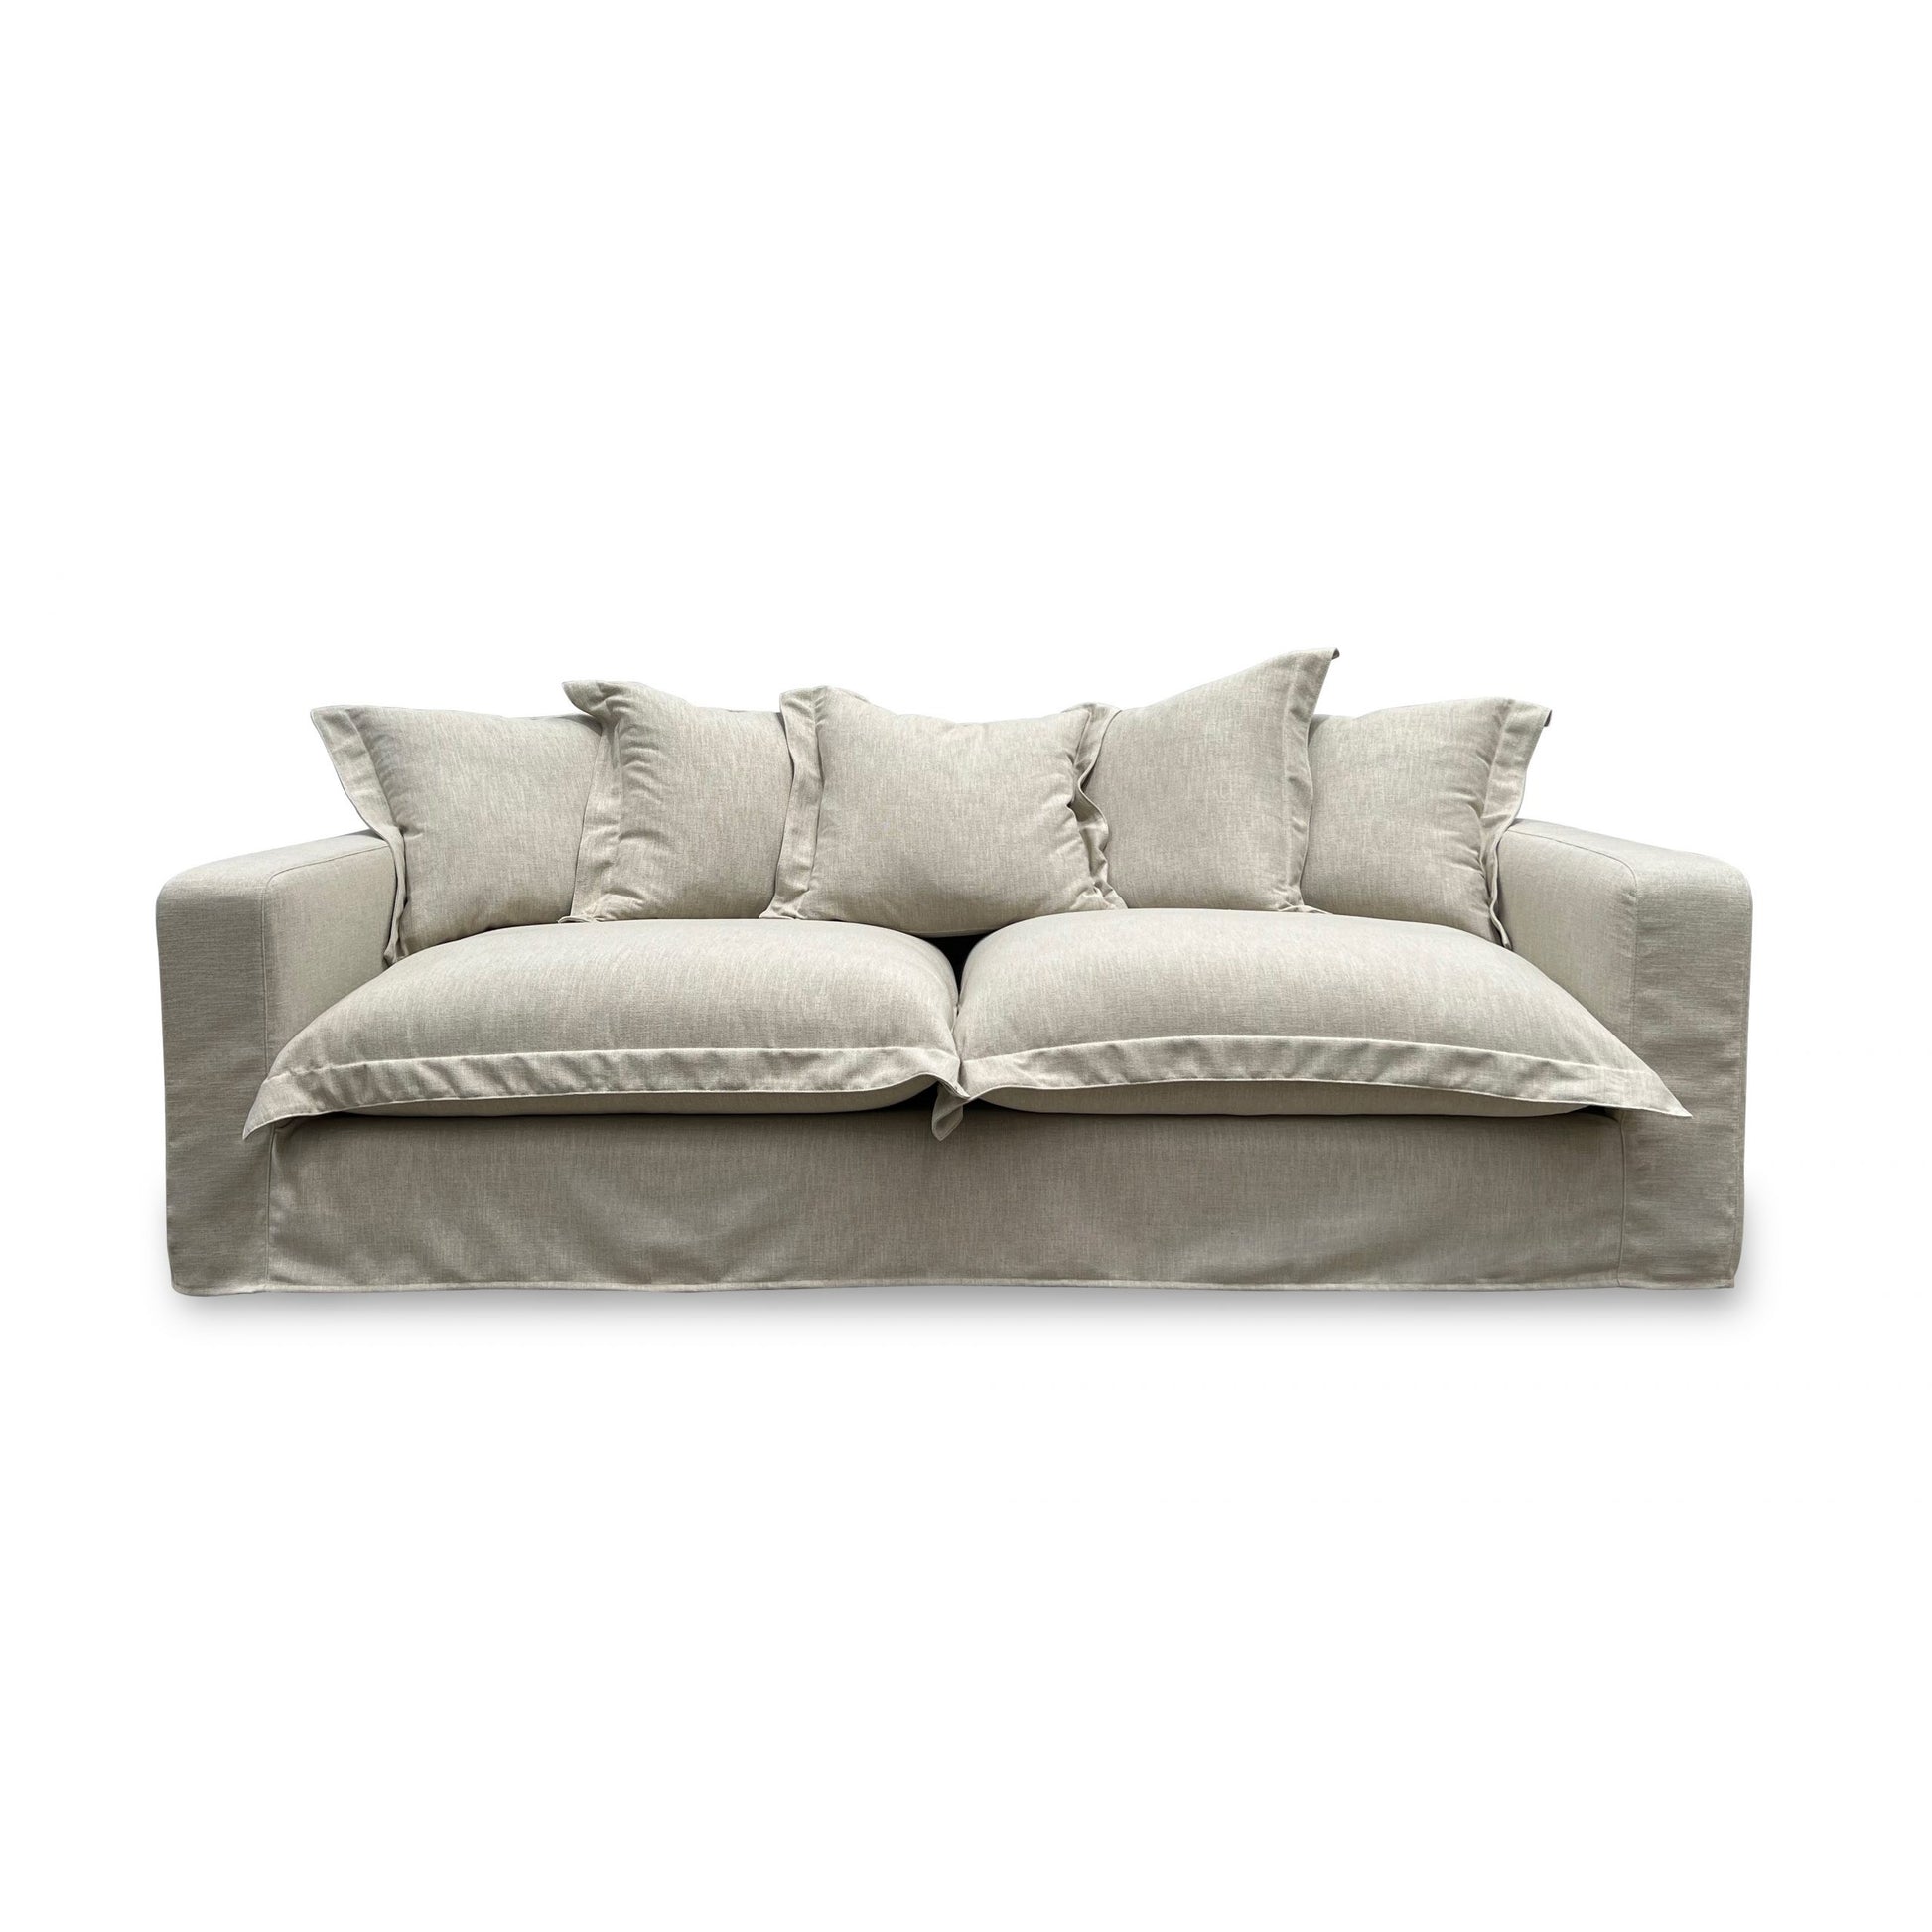 Roseberry Loose Cover Sofa by Molmic available from Make Your House A Home, Furniture Store located in Bendigo, Victoria. Australian Made in Melbourne.